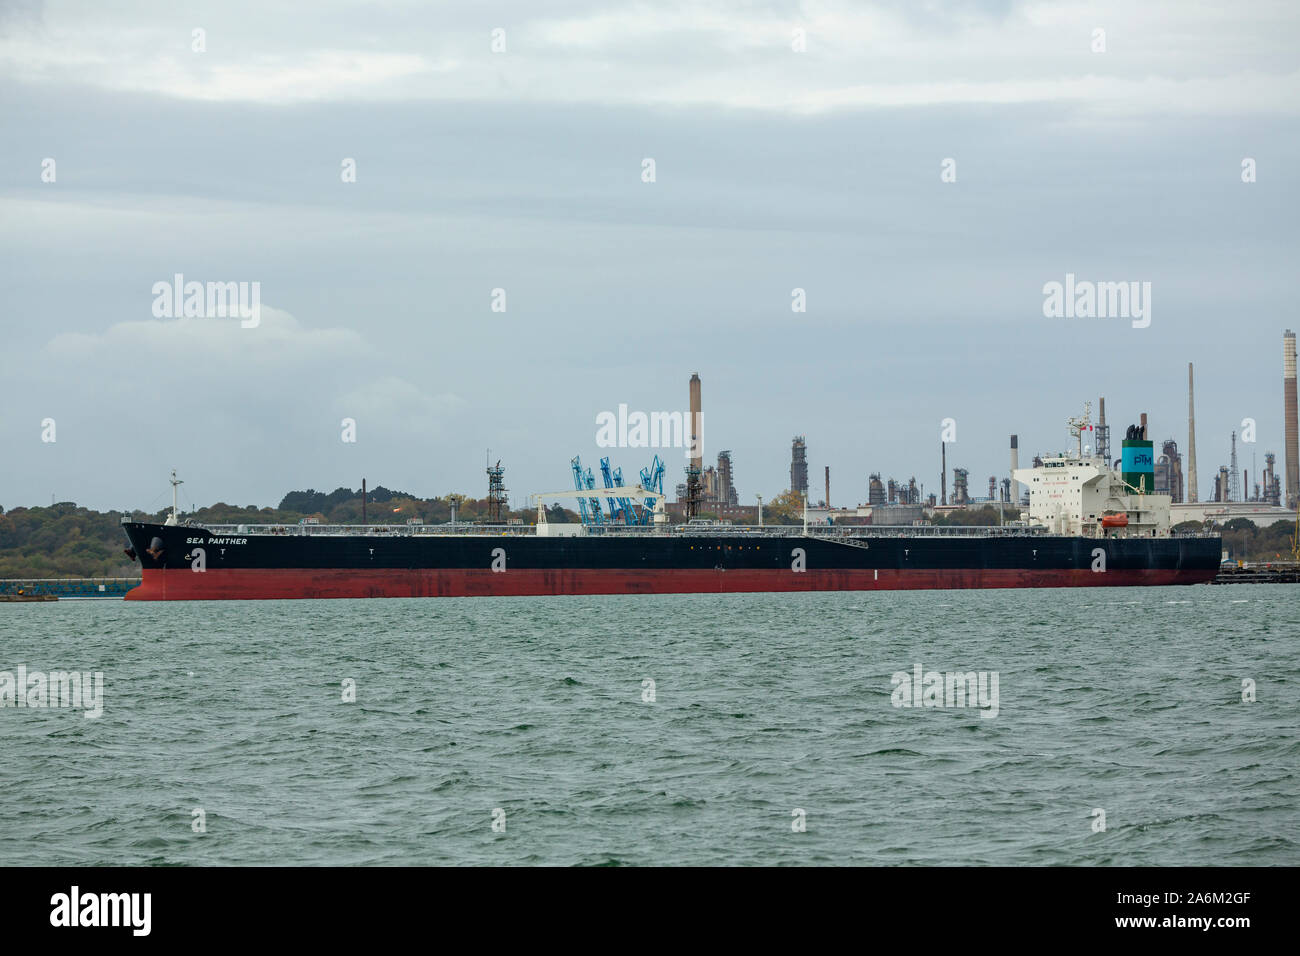 Super tanker Sea Panther birthed alongside the oil refinery at Fawley on Southampton water. Stock Photo